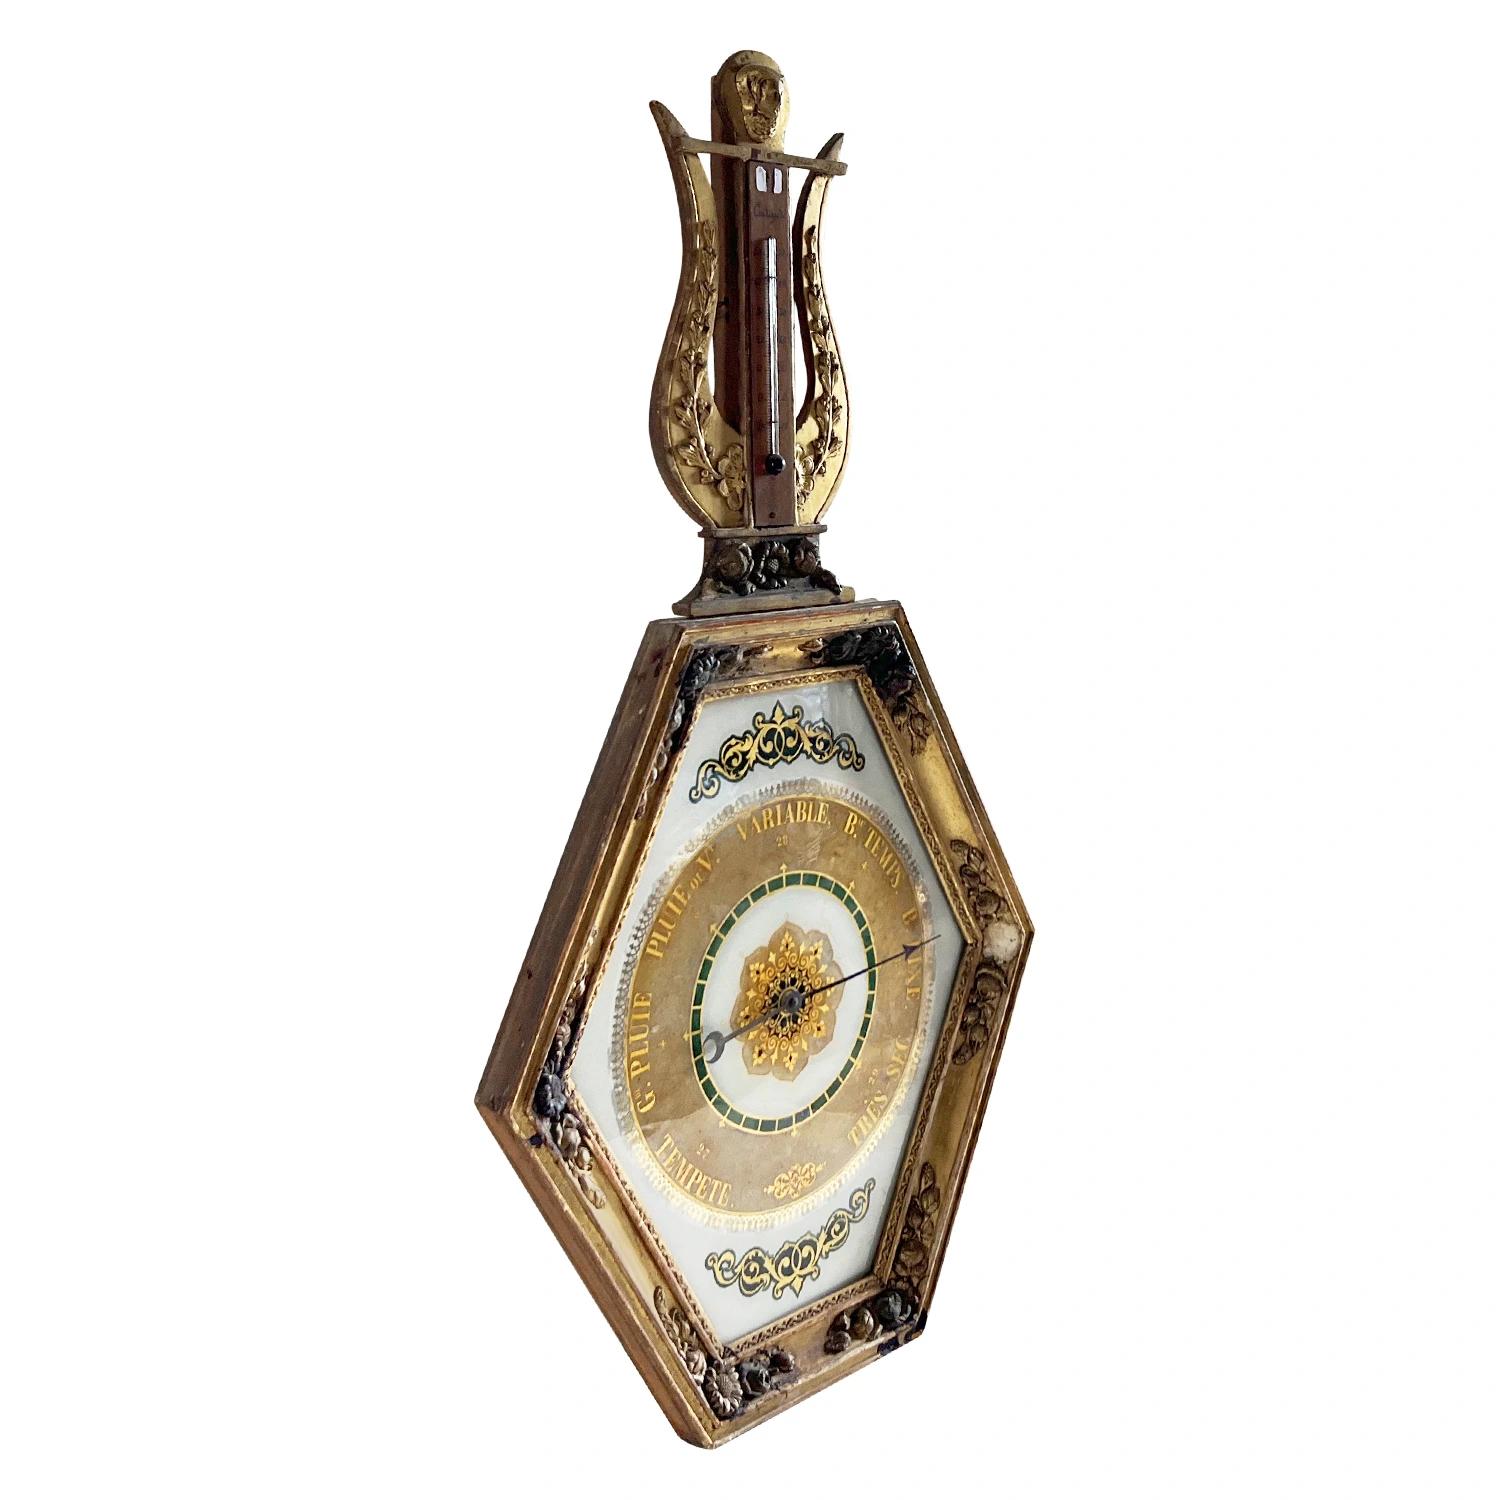 A rare antique finely worked French barometer with lyre shaped crest thermometer above a large hexagonal framed barometer. The Parisian décor piece is made of hand carved gilded wood in good condition. The barometers from this period were often used